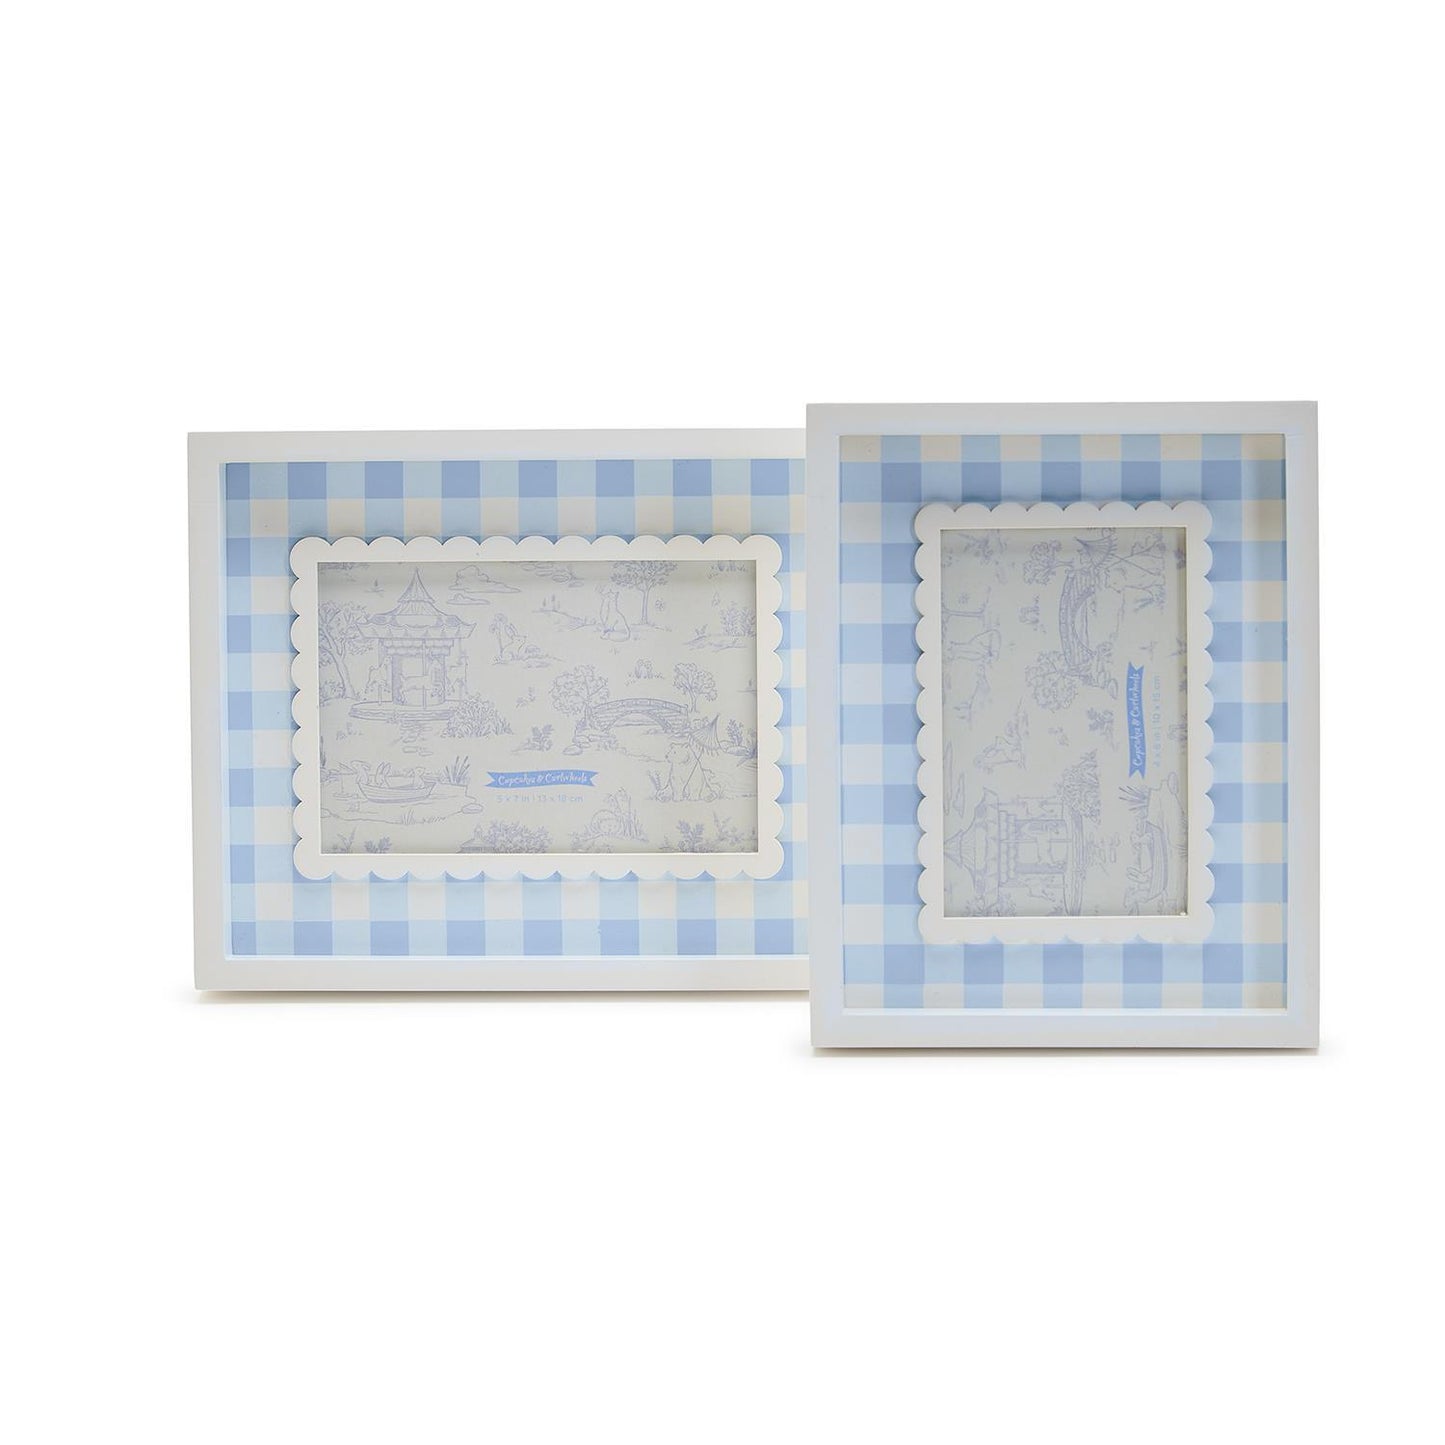 Blue Gingham Photo Frames in sizes 4" x 6" and 5" x 7"